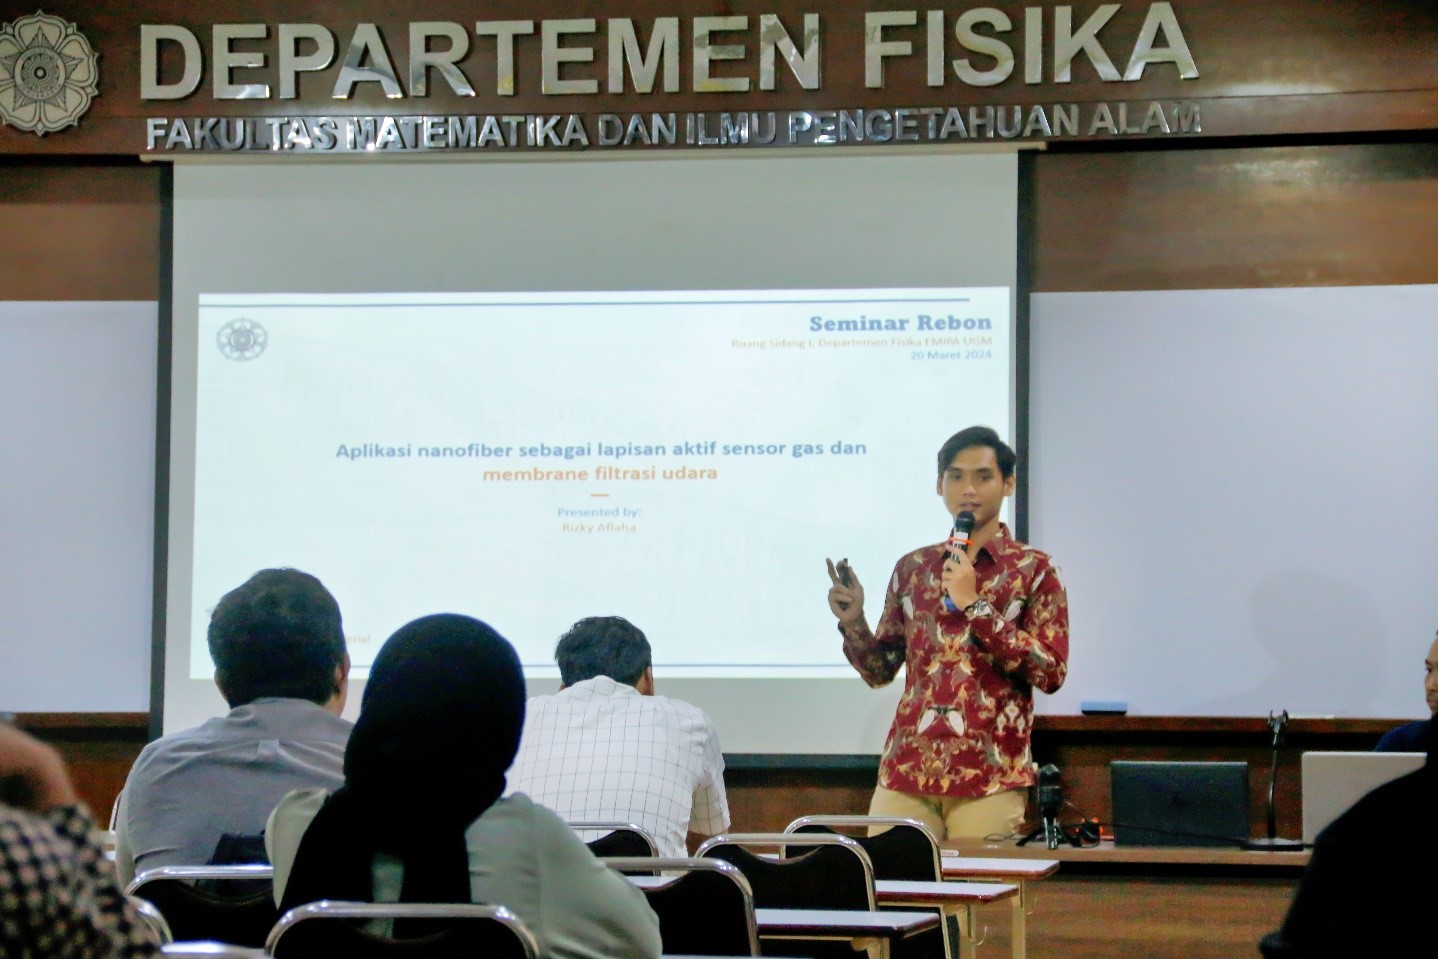 Department of Physics FMIPA UGM Holds Nanofiber Application Seminar: Sharing Knowledge about the Benefits of Nanofiber